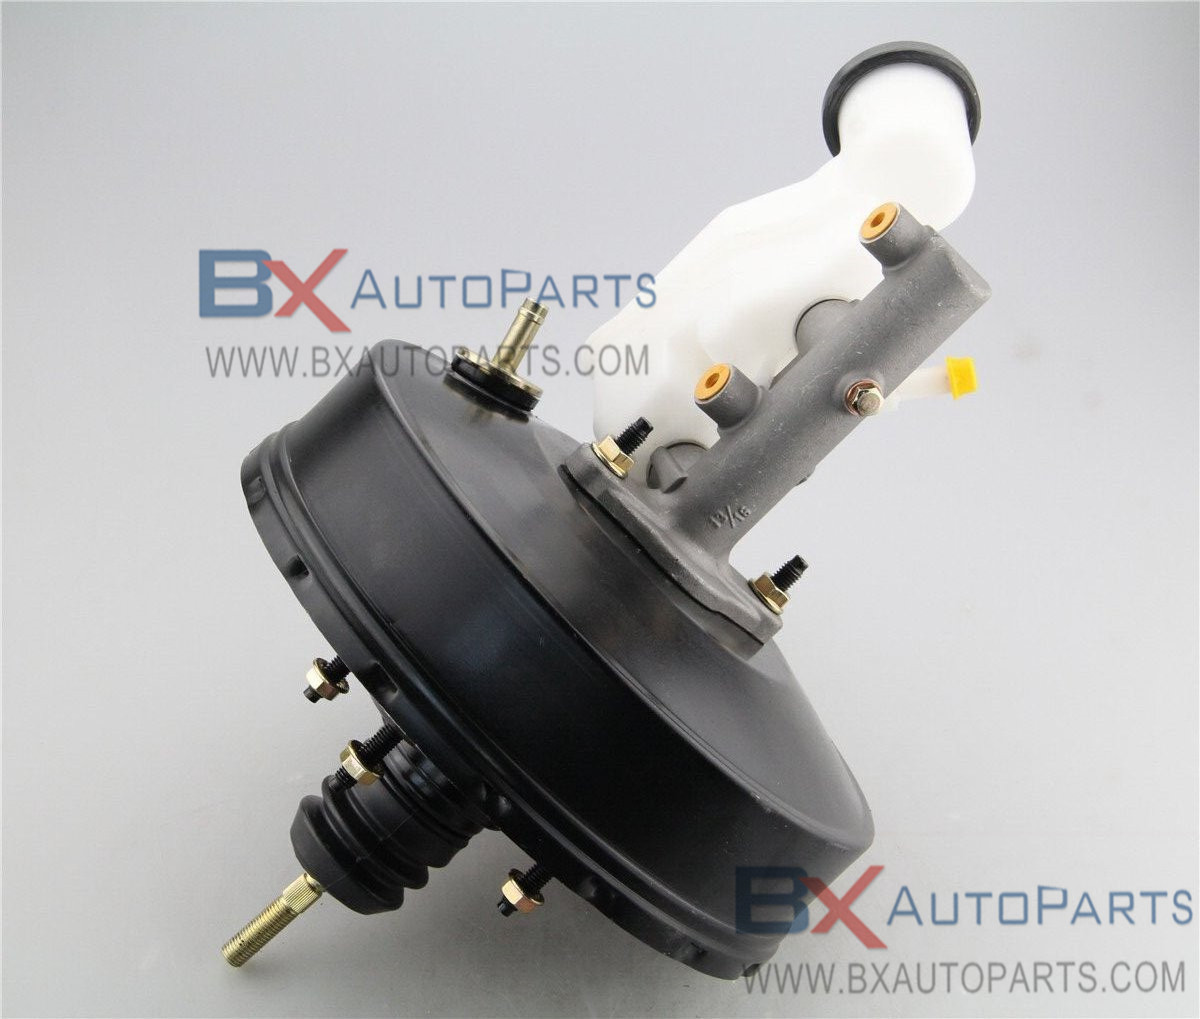 Brake Booster with Master Cylinder TOYOTA YARIS VIOS 06-14 NCP90/91 LHD